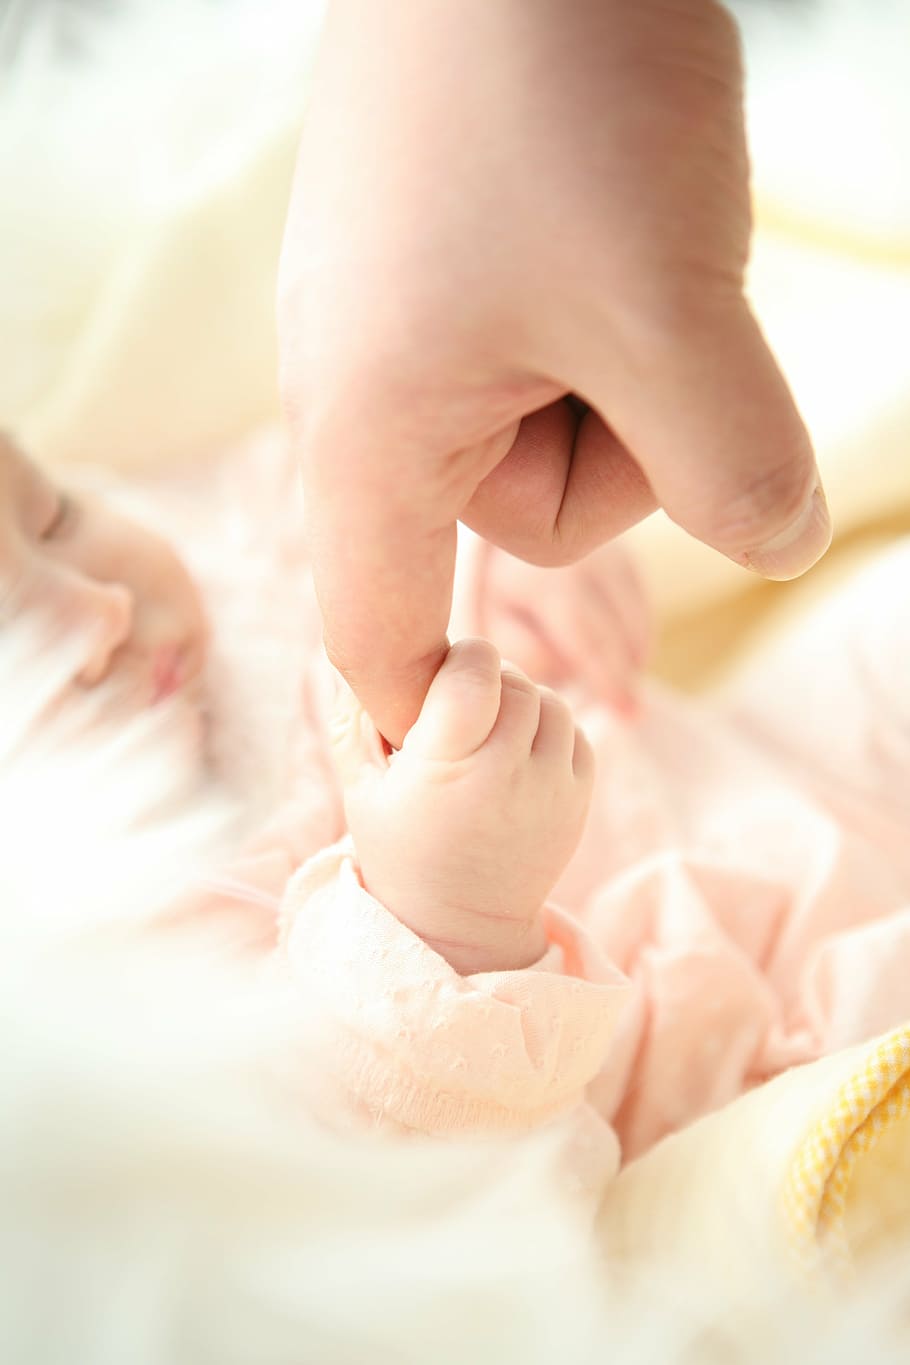 baby holding index finger of person, hand, dad, child, human Hand, HD wallpaper